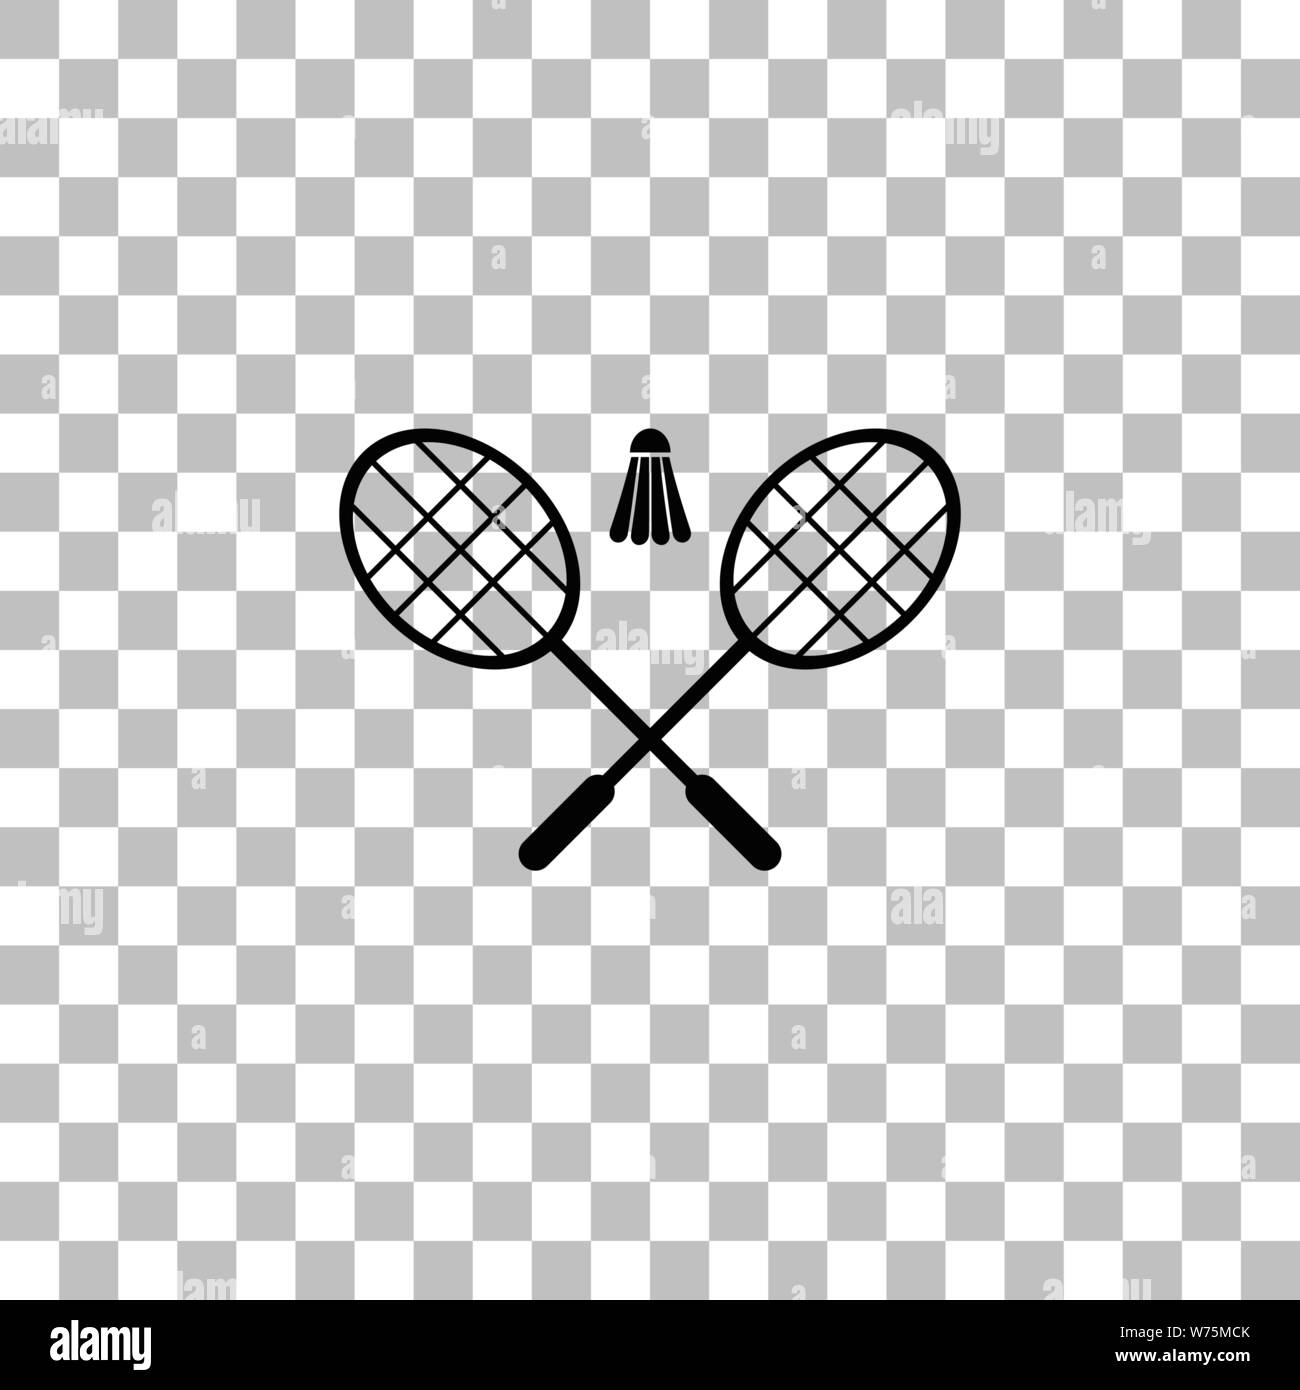 project on badminton game